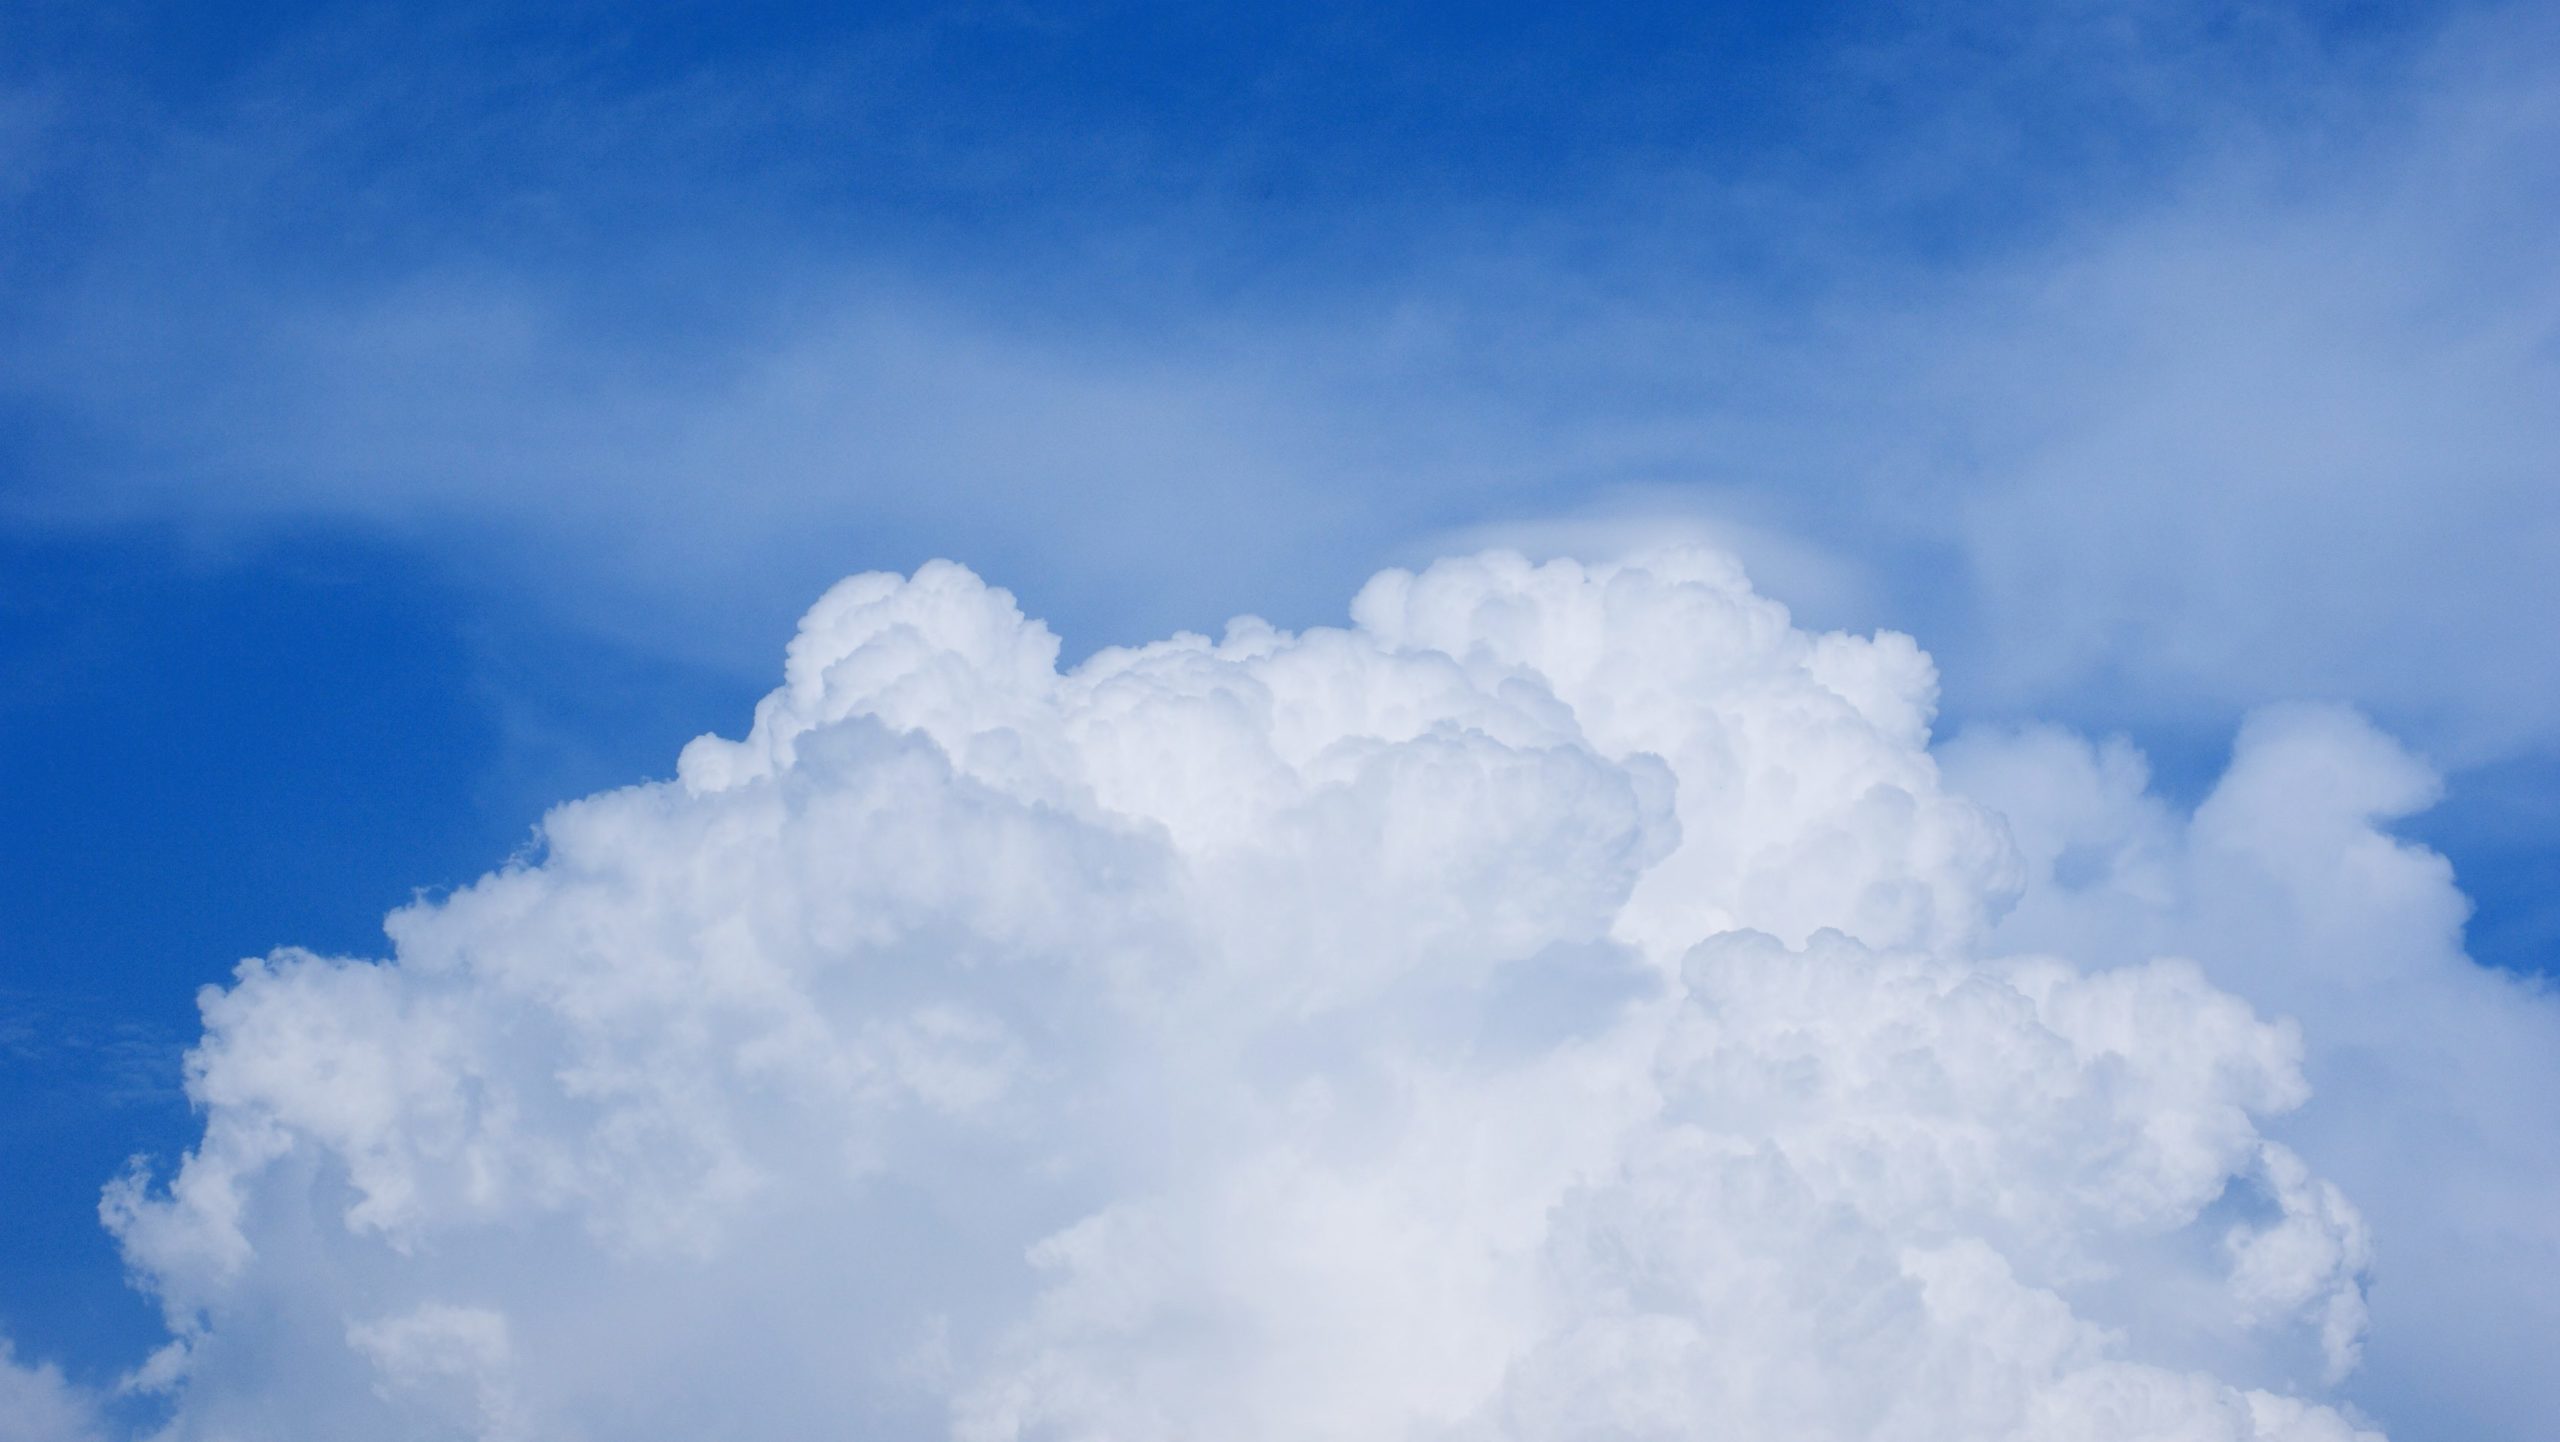 Visibility and Security Among Top Cloud Technology Concerns